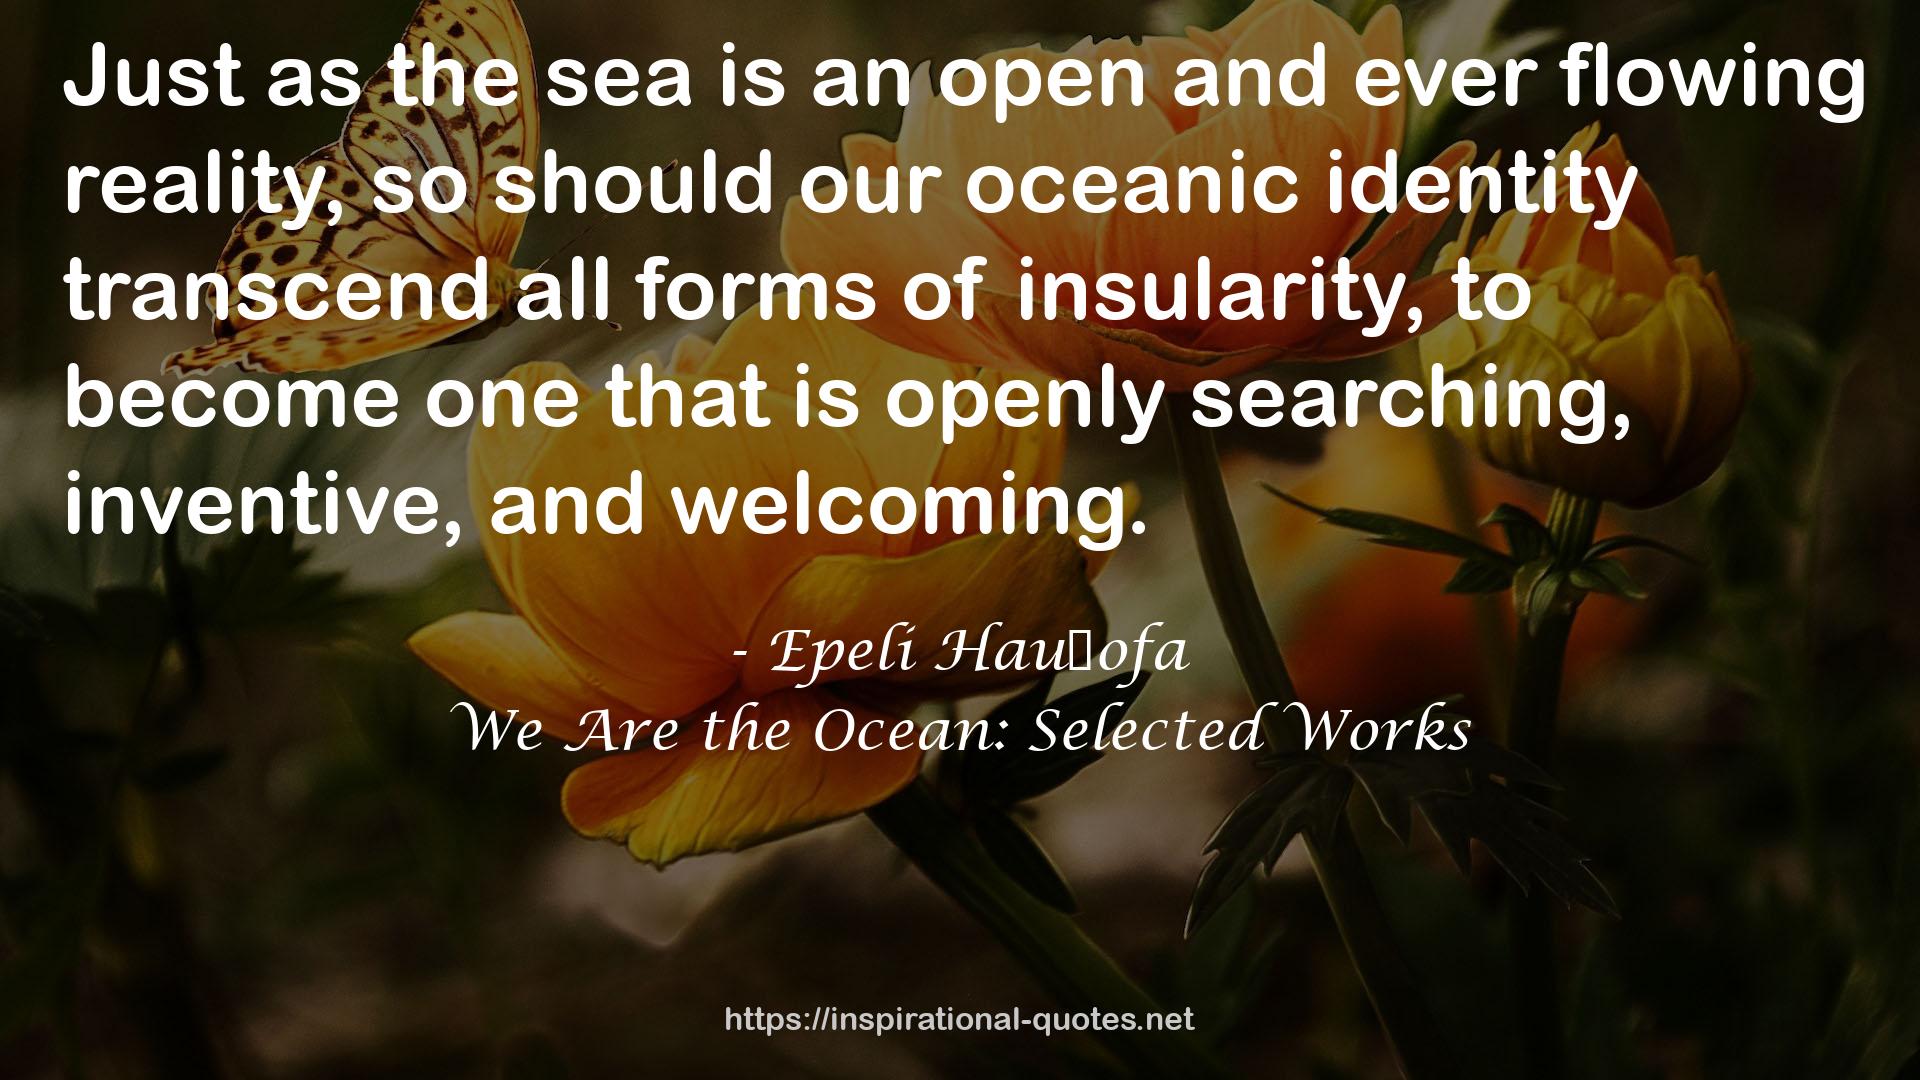 We Are the Ocean: Selected Works QUOTES